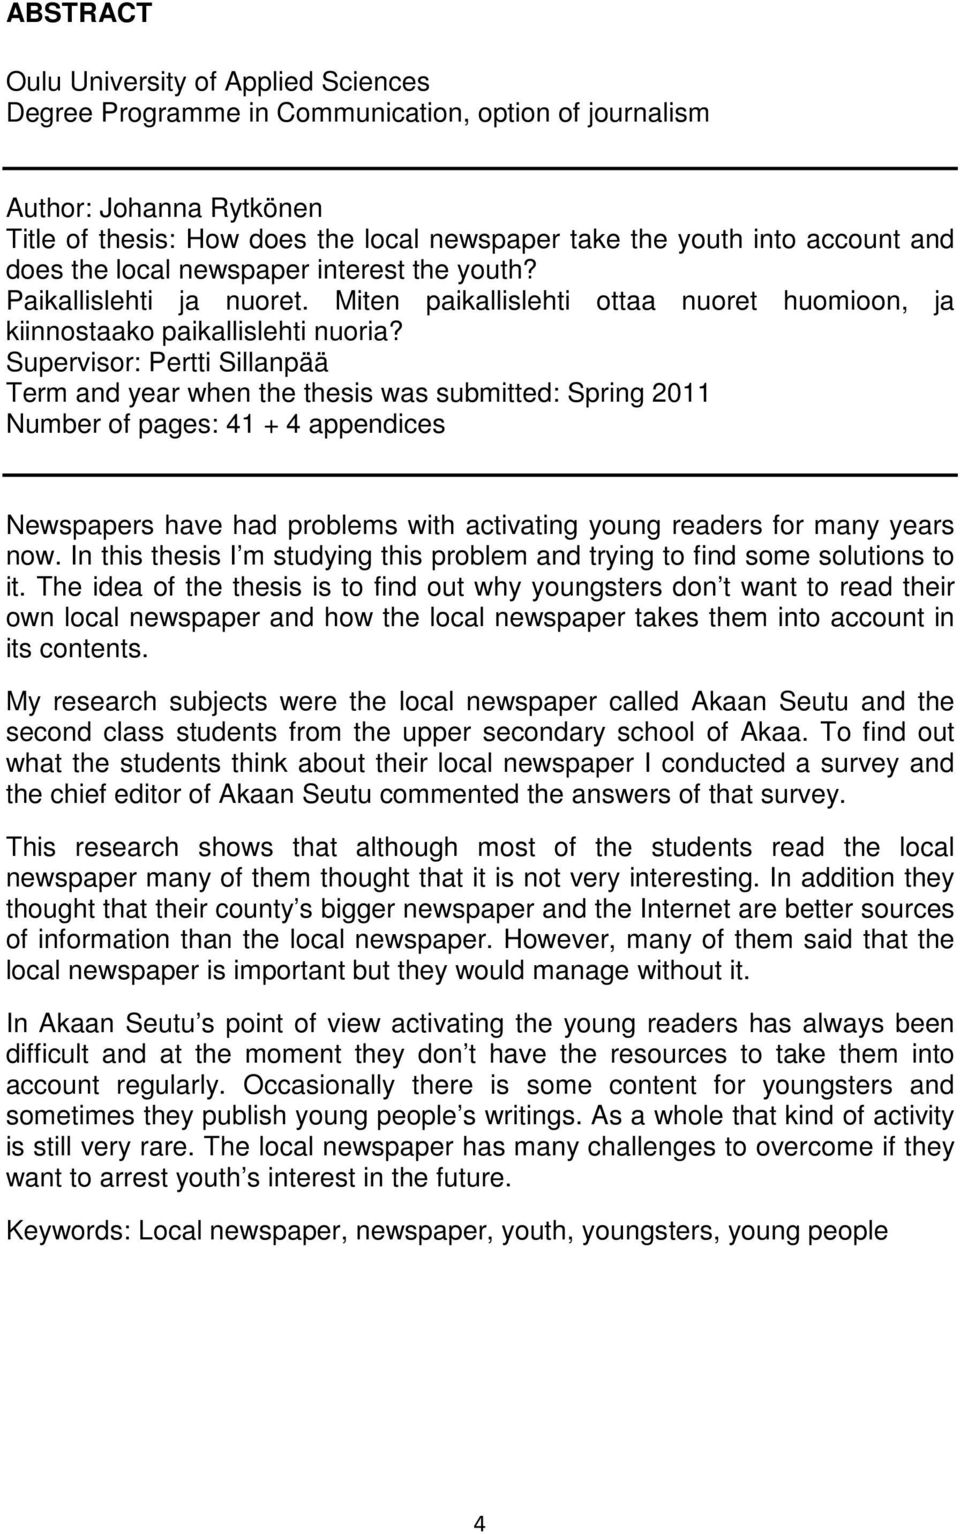 Supervisor: Pertti Sillanpää Term and year when the thesis was submitted: Spring 2011 Number of pages: 41 + 4 appendices Newspapers have had problems with activating young readers for many years now.